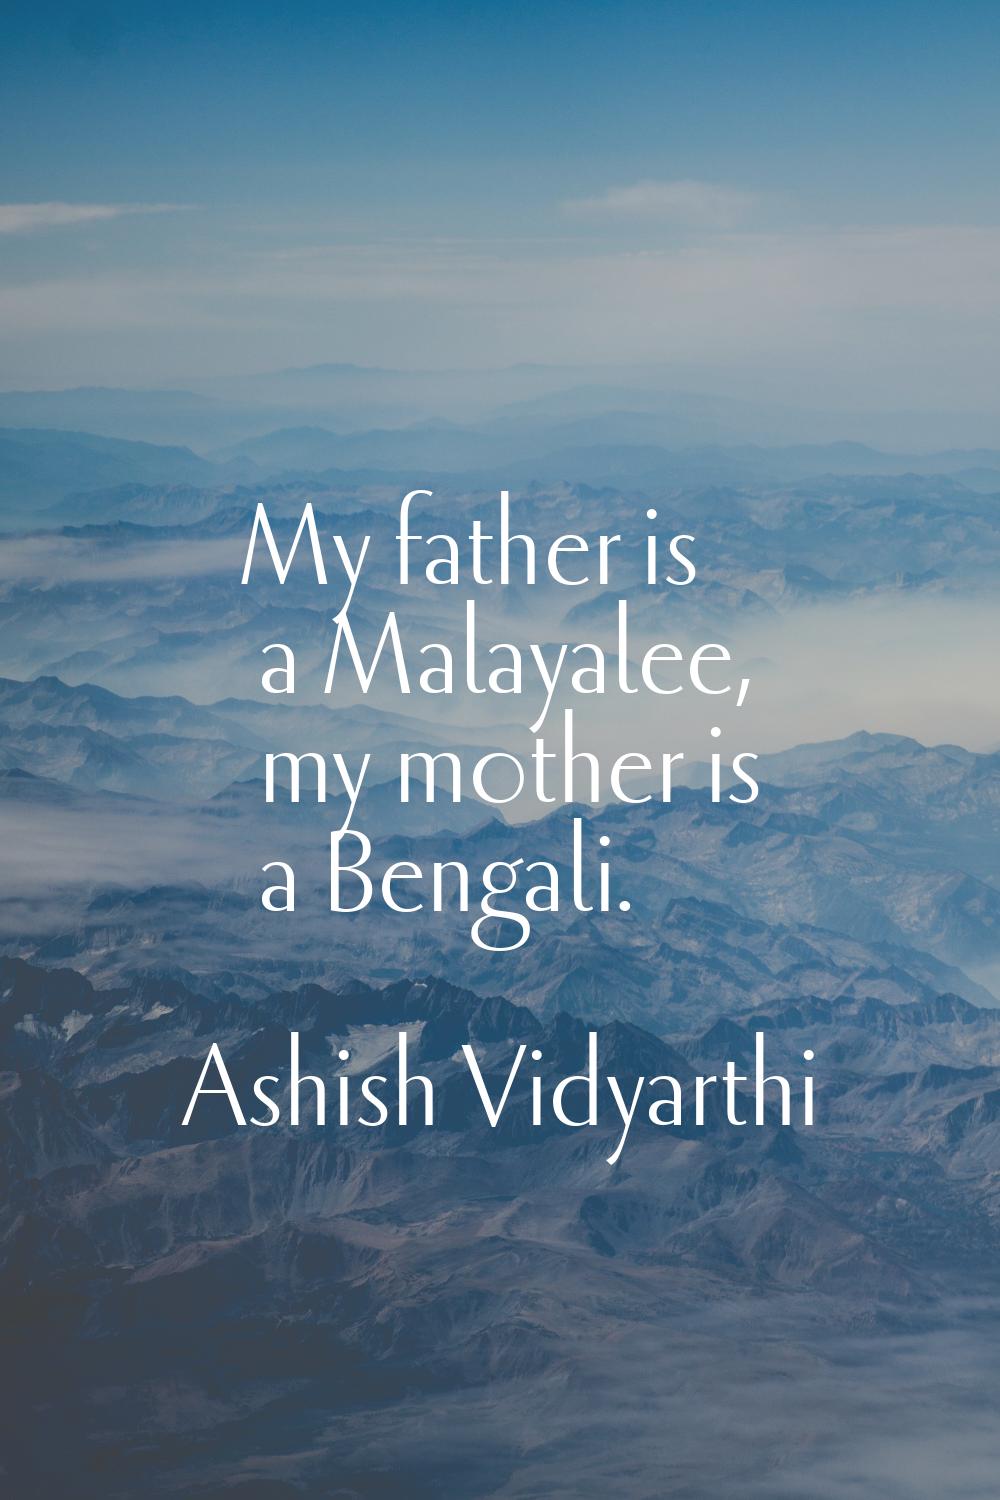 My father is a Malayalee, my mother is a Bengali.